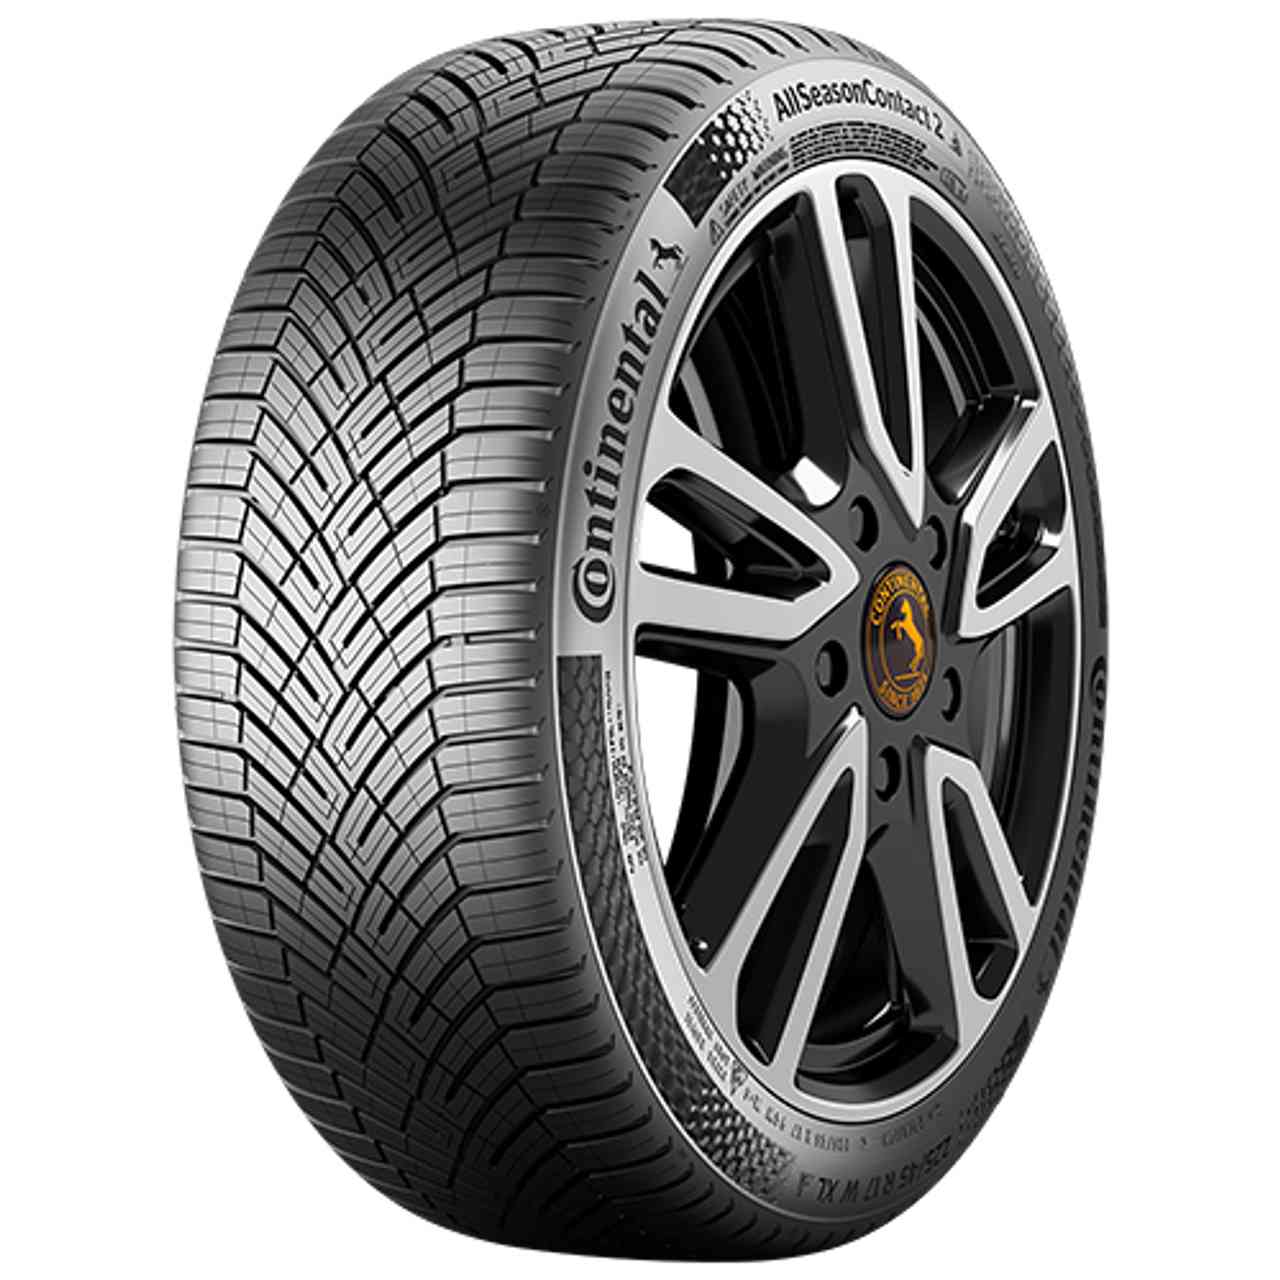 CONTINENTAL ALLSEASONCONTACT 2 (EVc) 185/60R15 88V BSW